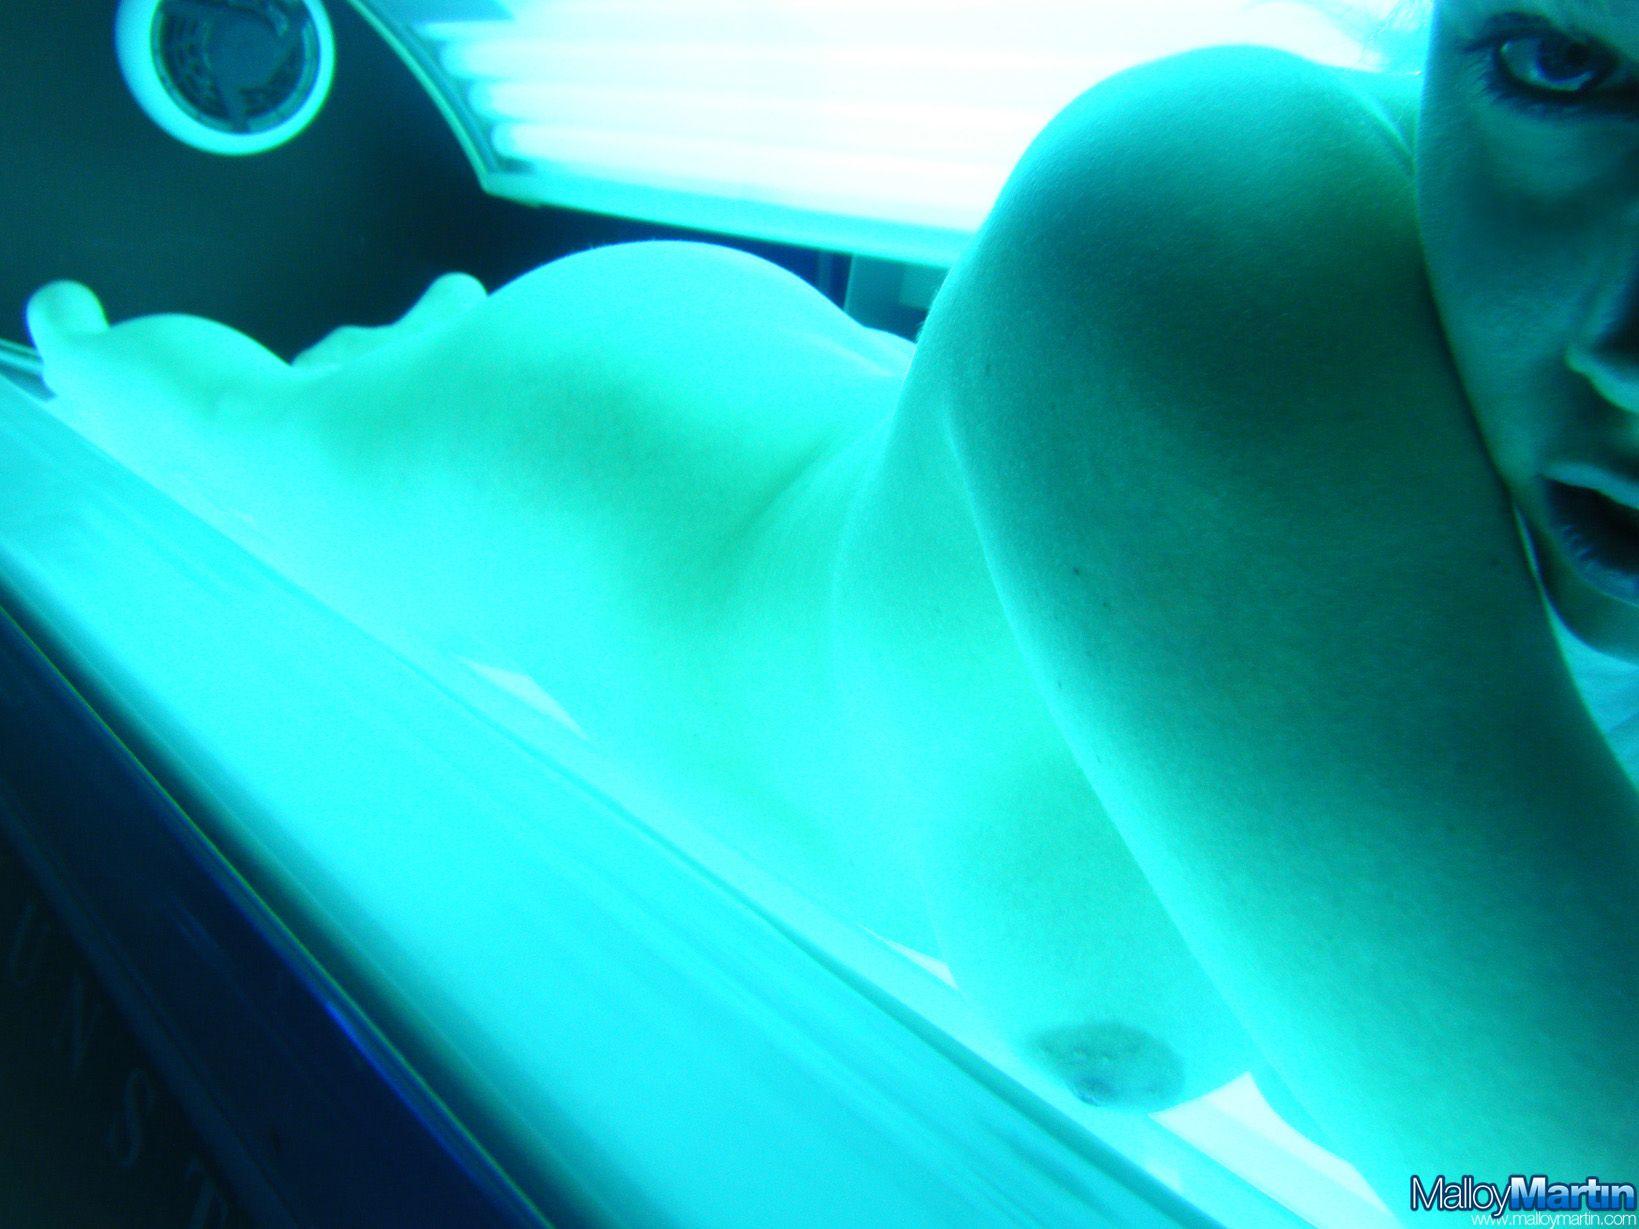 Pictures of teen amateur Malloy Martin showing her pussy on a tanning bed #59194679